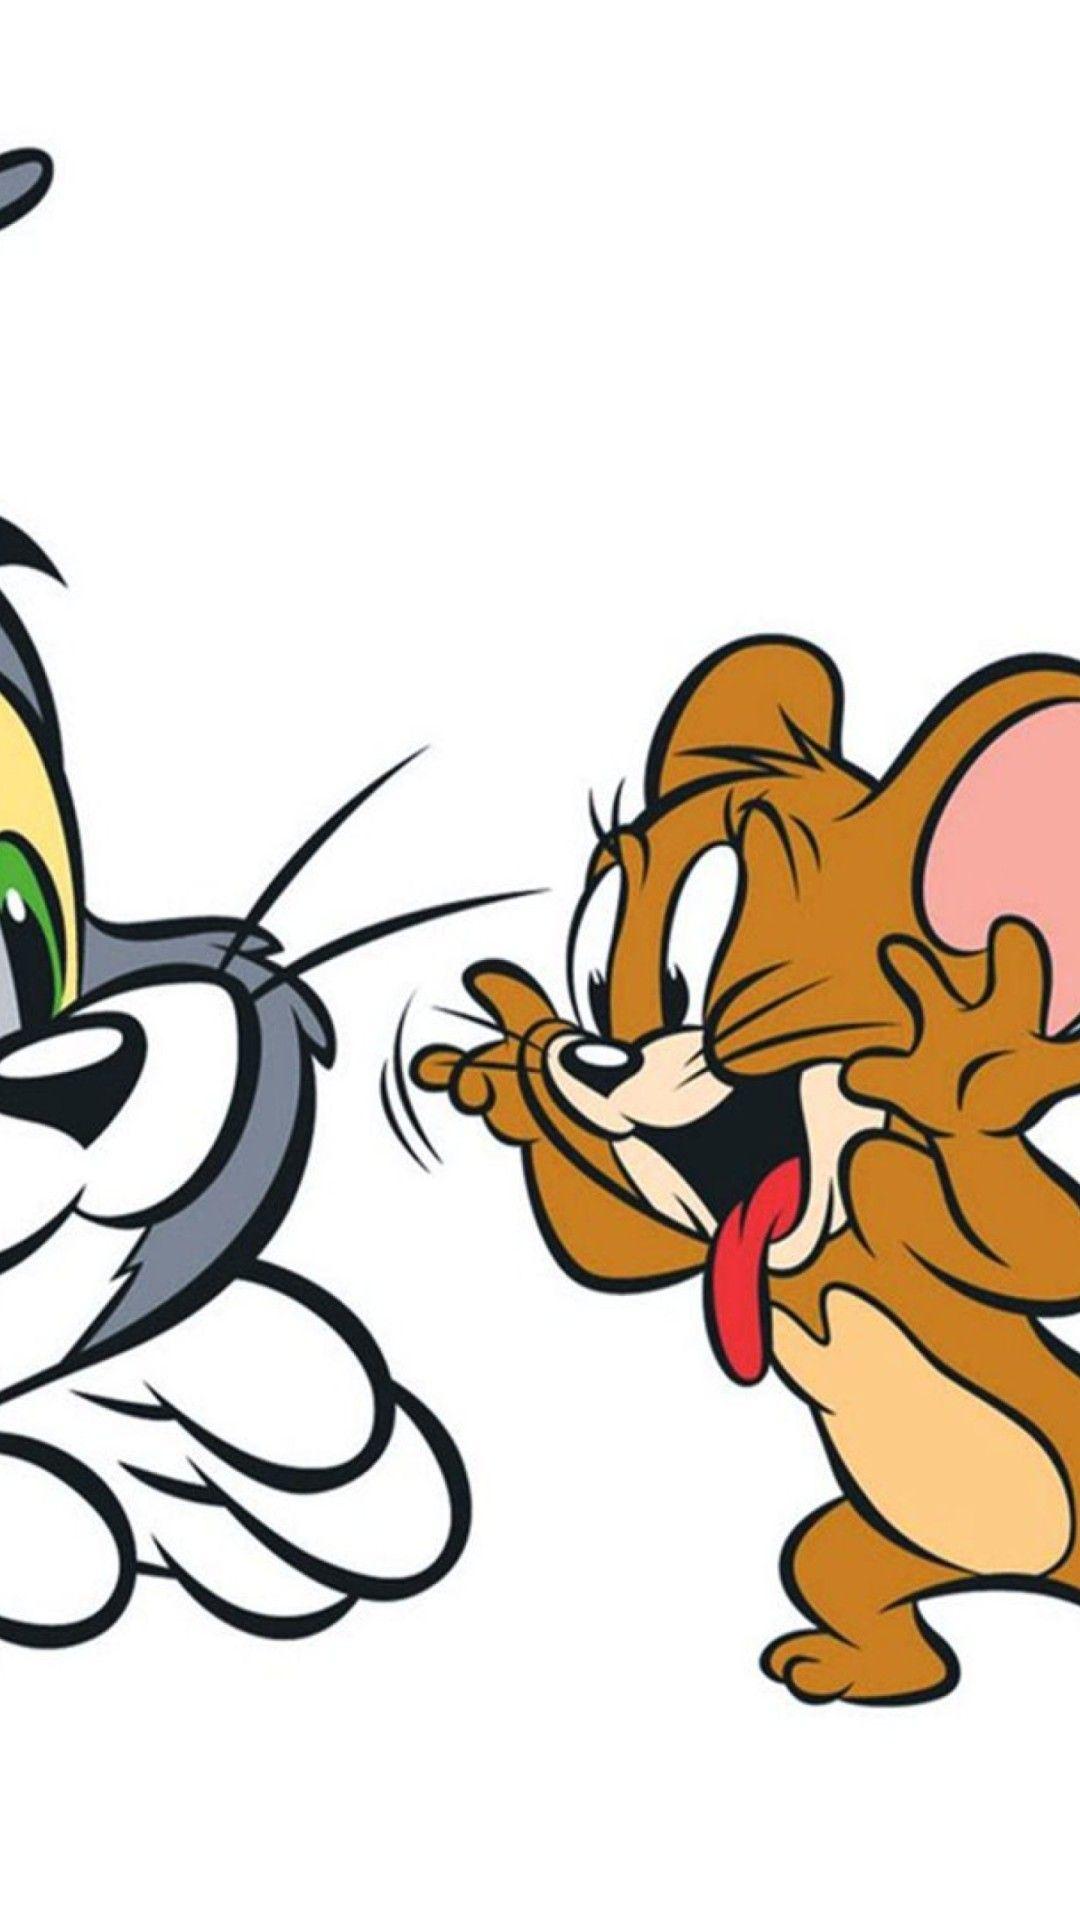 Tom and Jerry wallpaper for mobile and Background Image HD